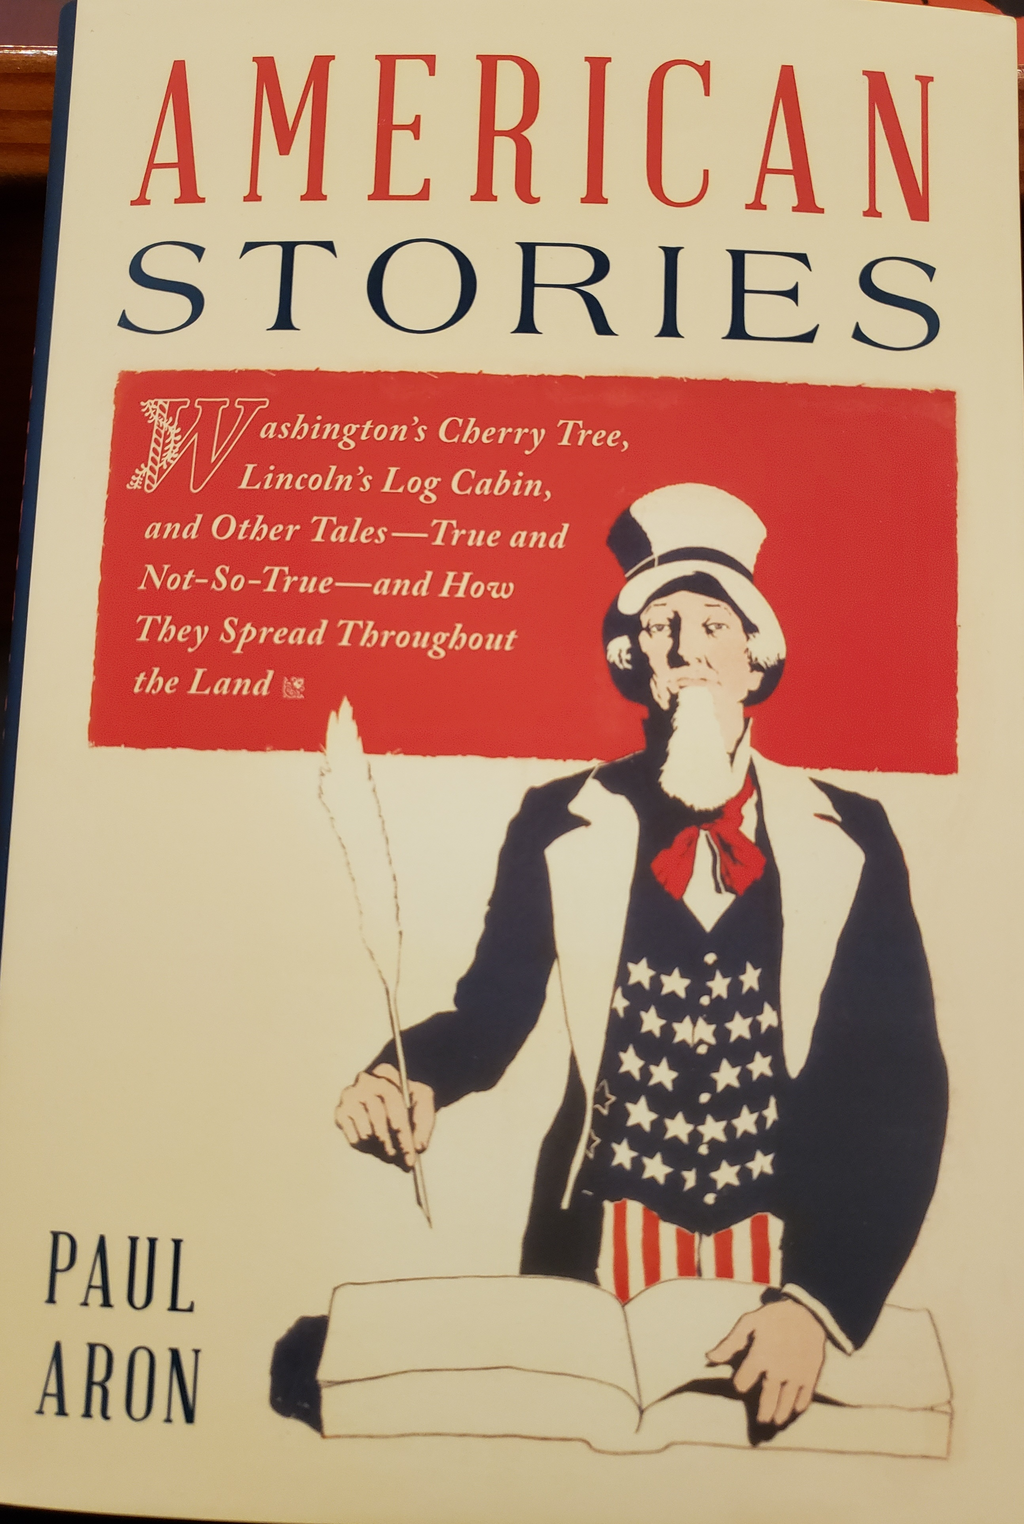 American Stories by Paul Aron